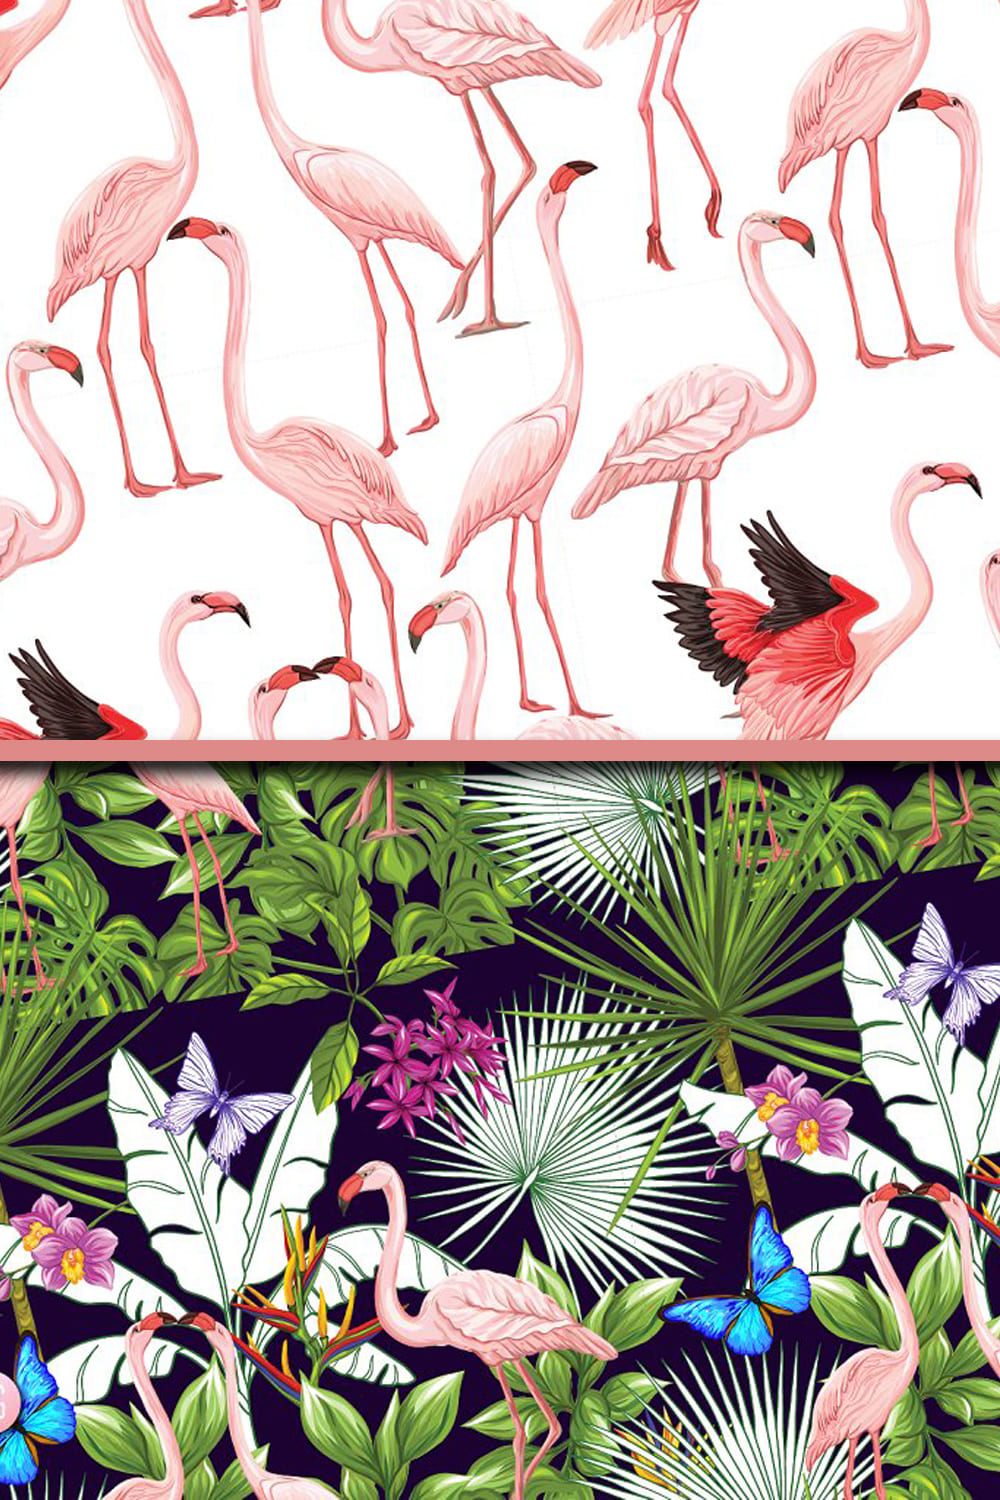 Diverse of flamingo in the pastel colors.